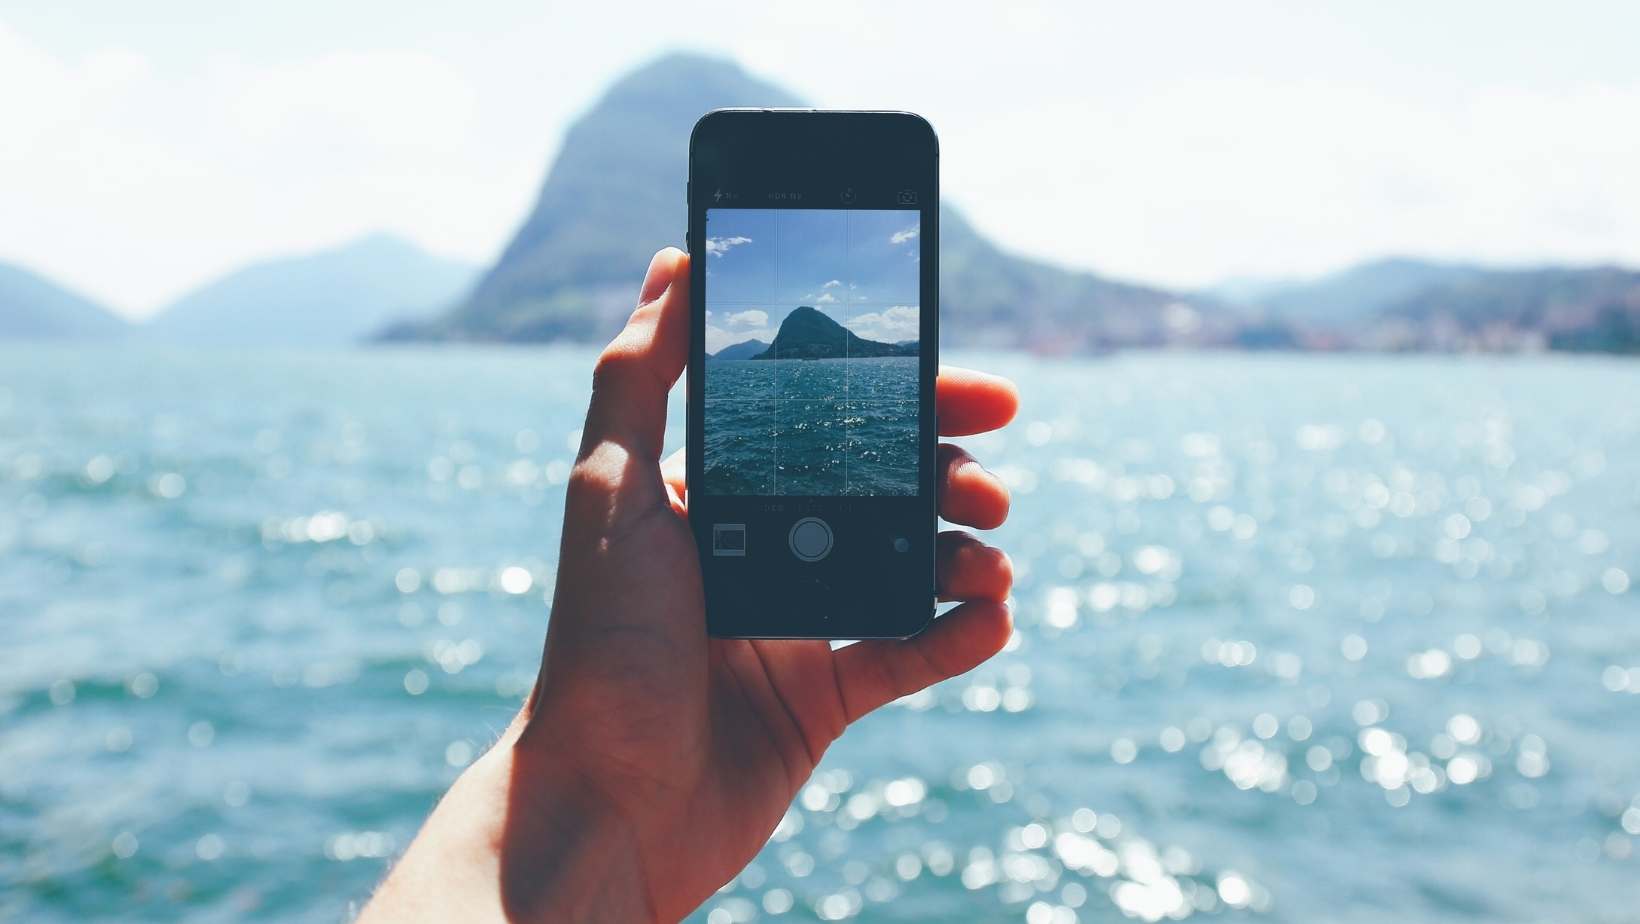 A stock photo from canva of someone taking a photograph of a seascape representing an influencer just sharing the good things in life